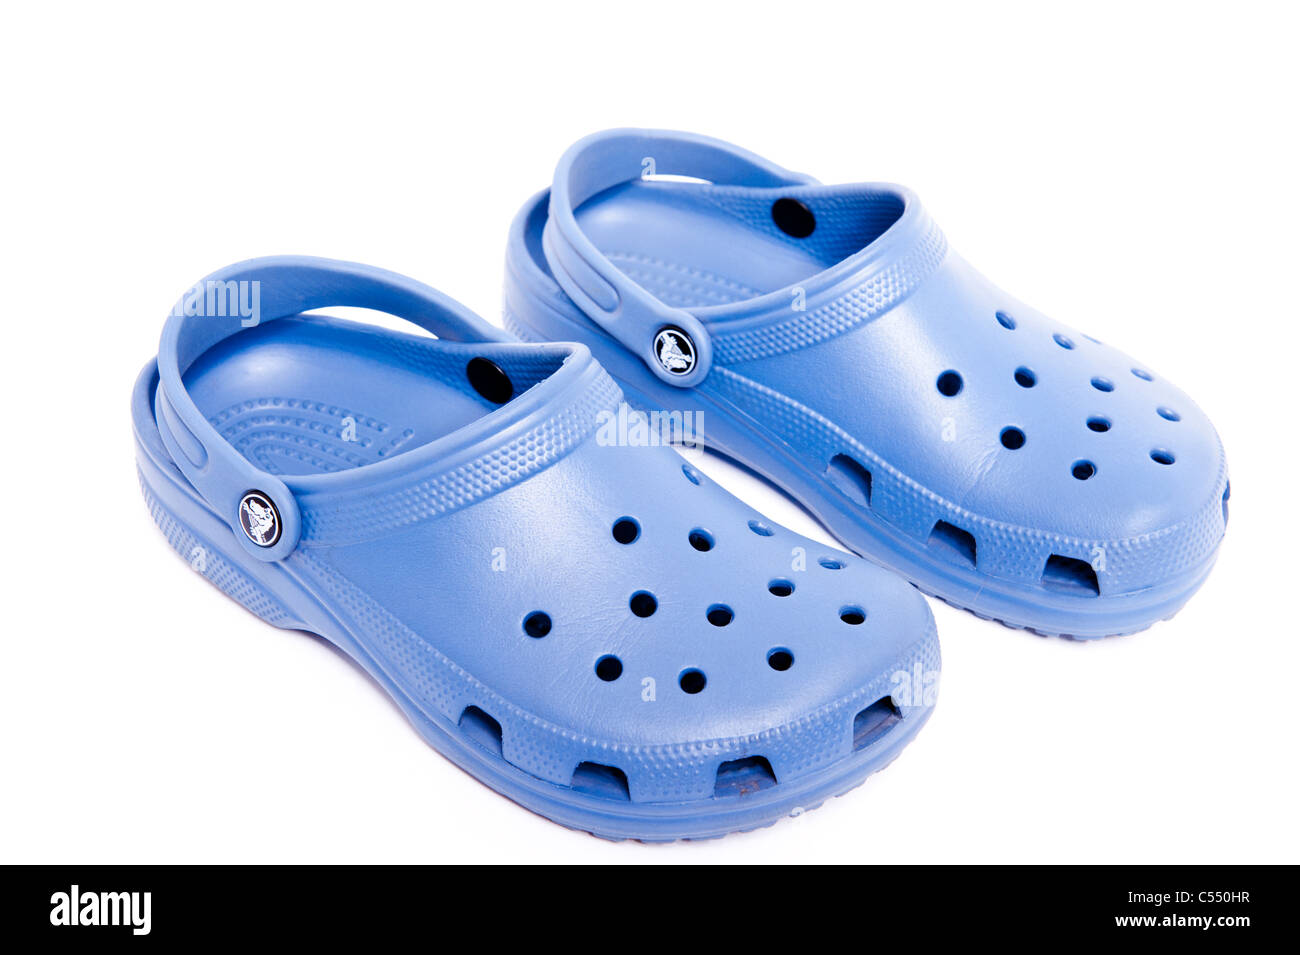 A pair of Crocs shoes on a white background Stock Photo - Alamy